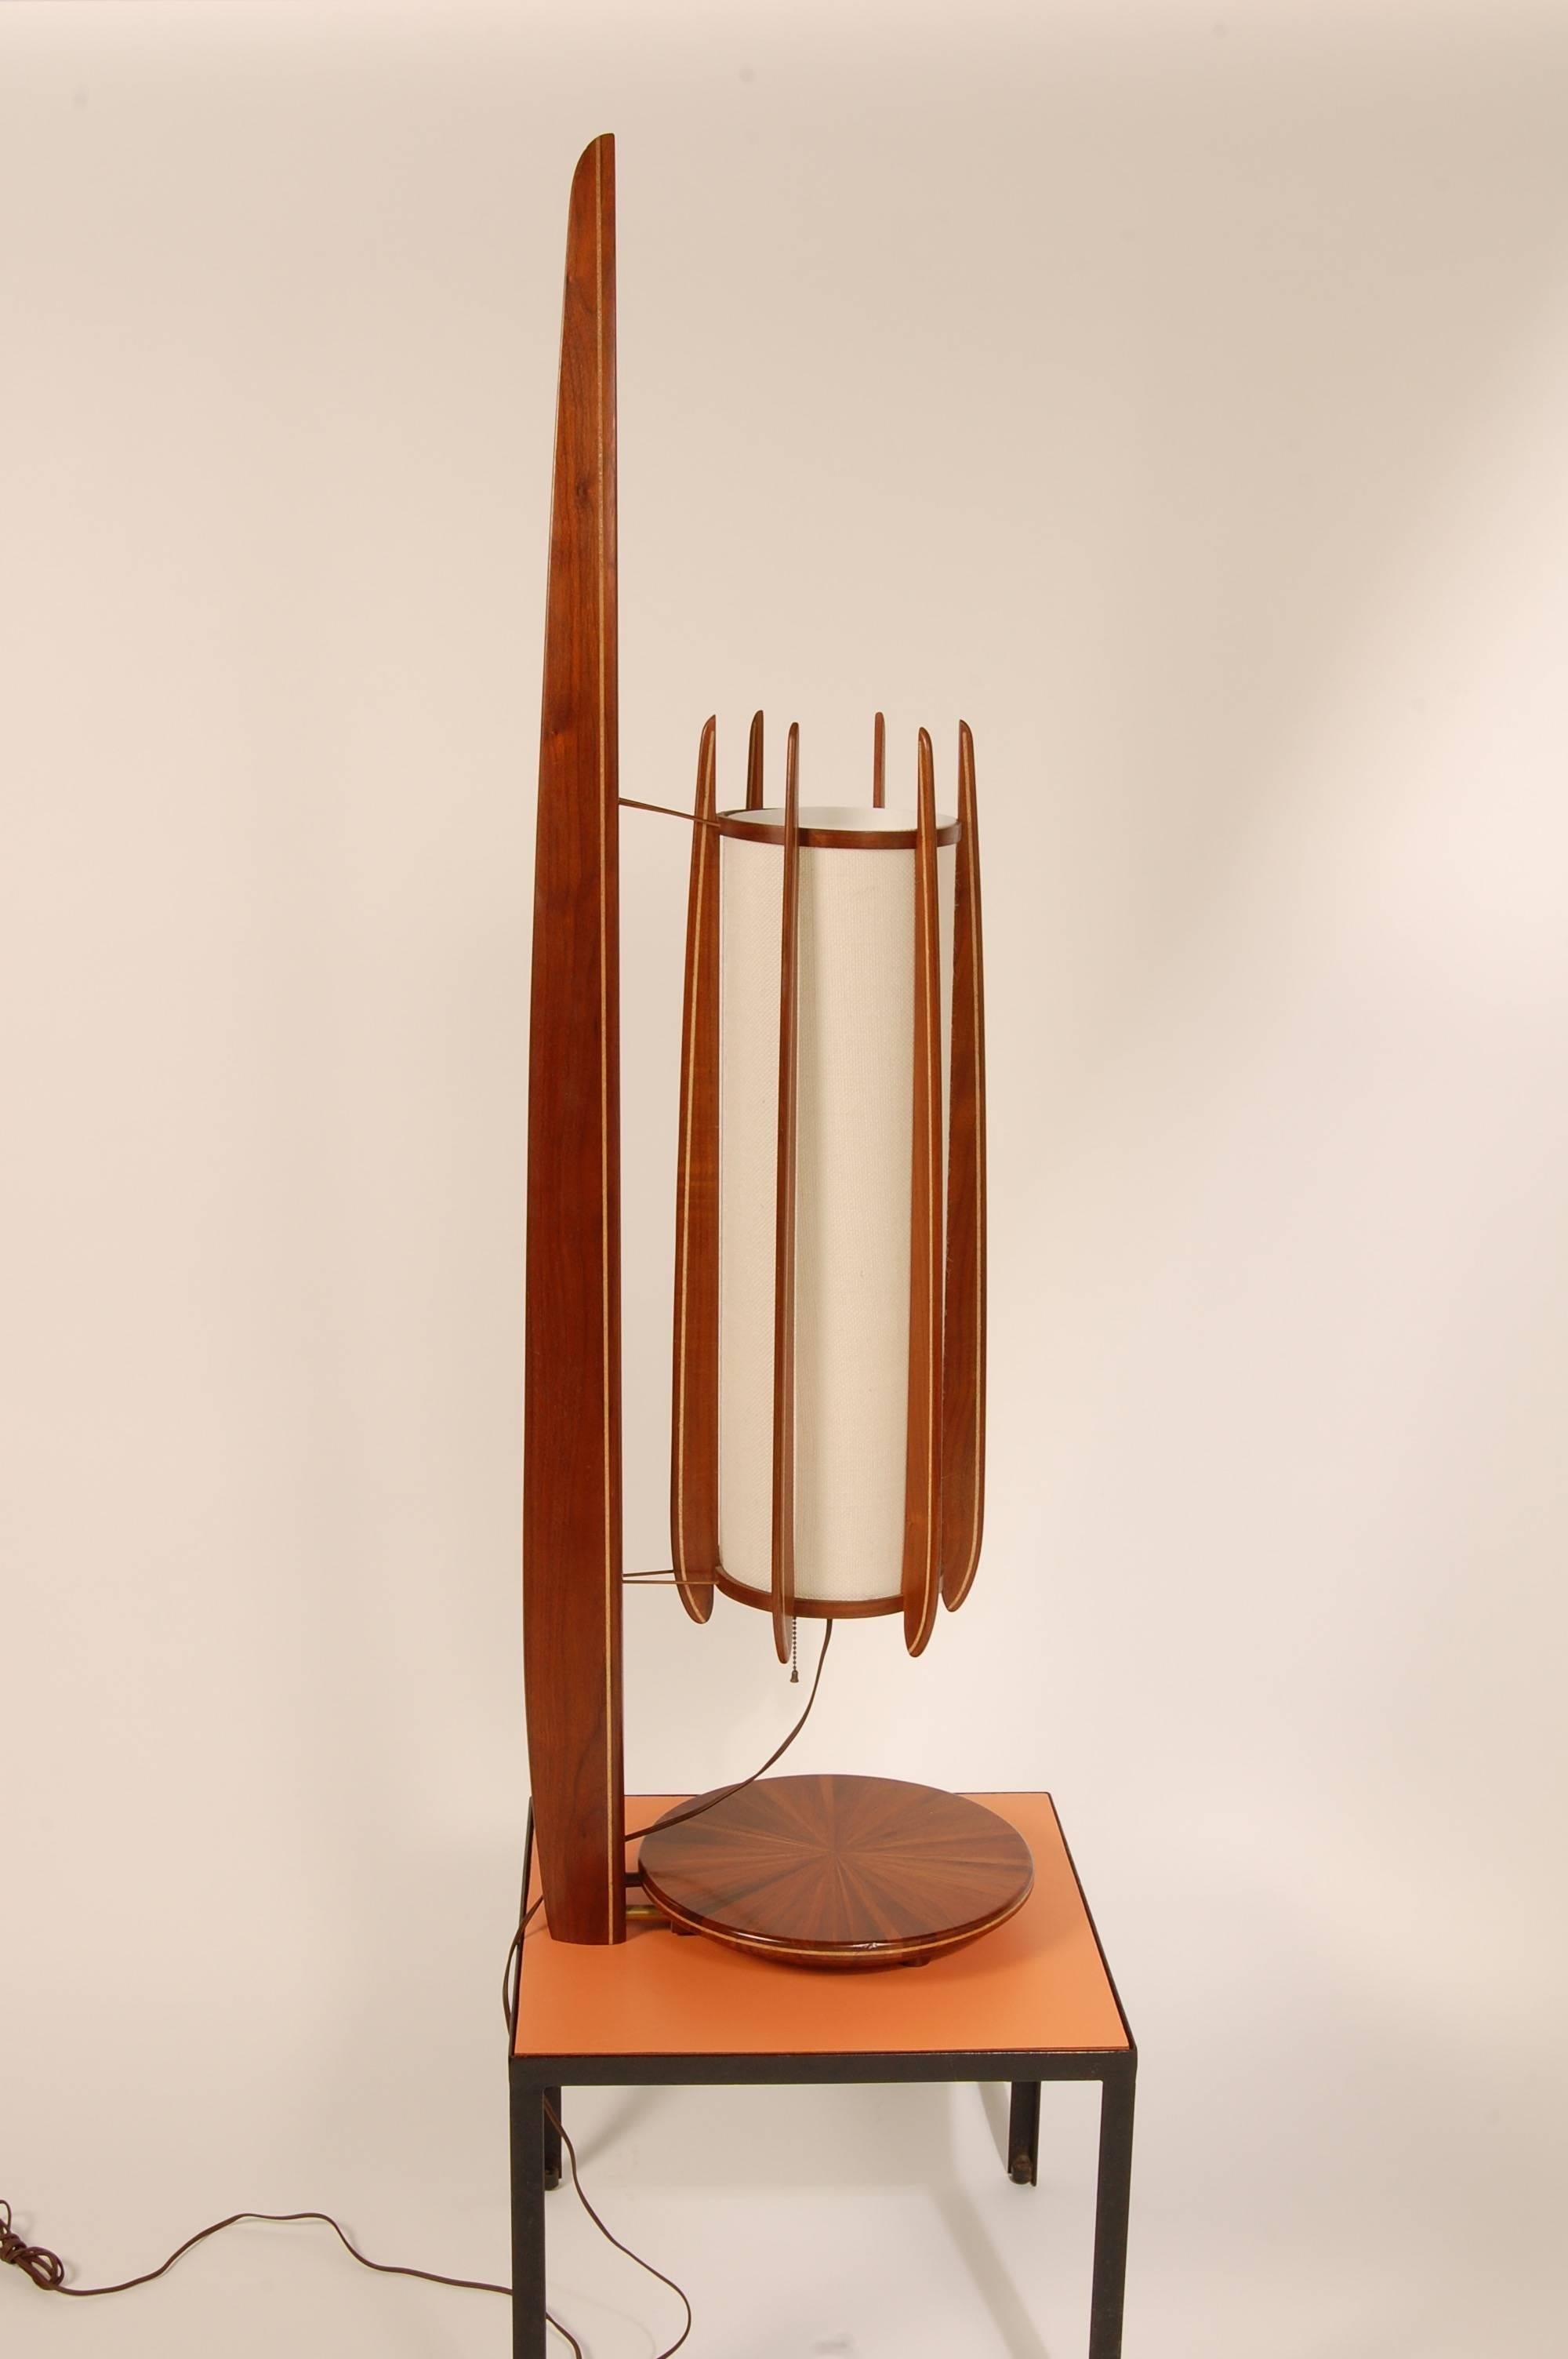 Sculptural one of a kind studio table lamp of amazing form and scale. Painstakingly created out of different species laminated walnut. The shade support has a series of copper rungs to hold it in place. The various sections of walnut in the base